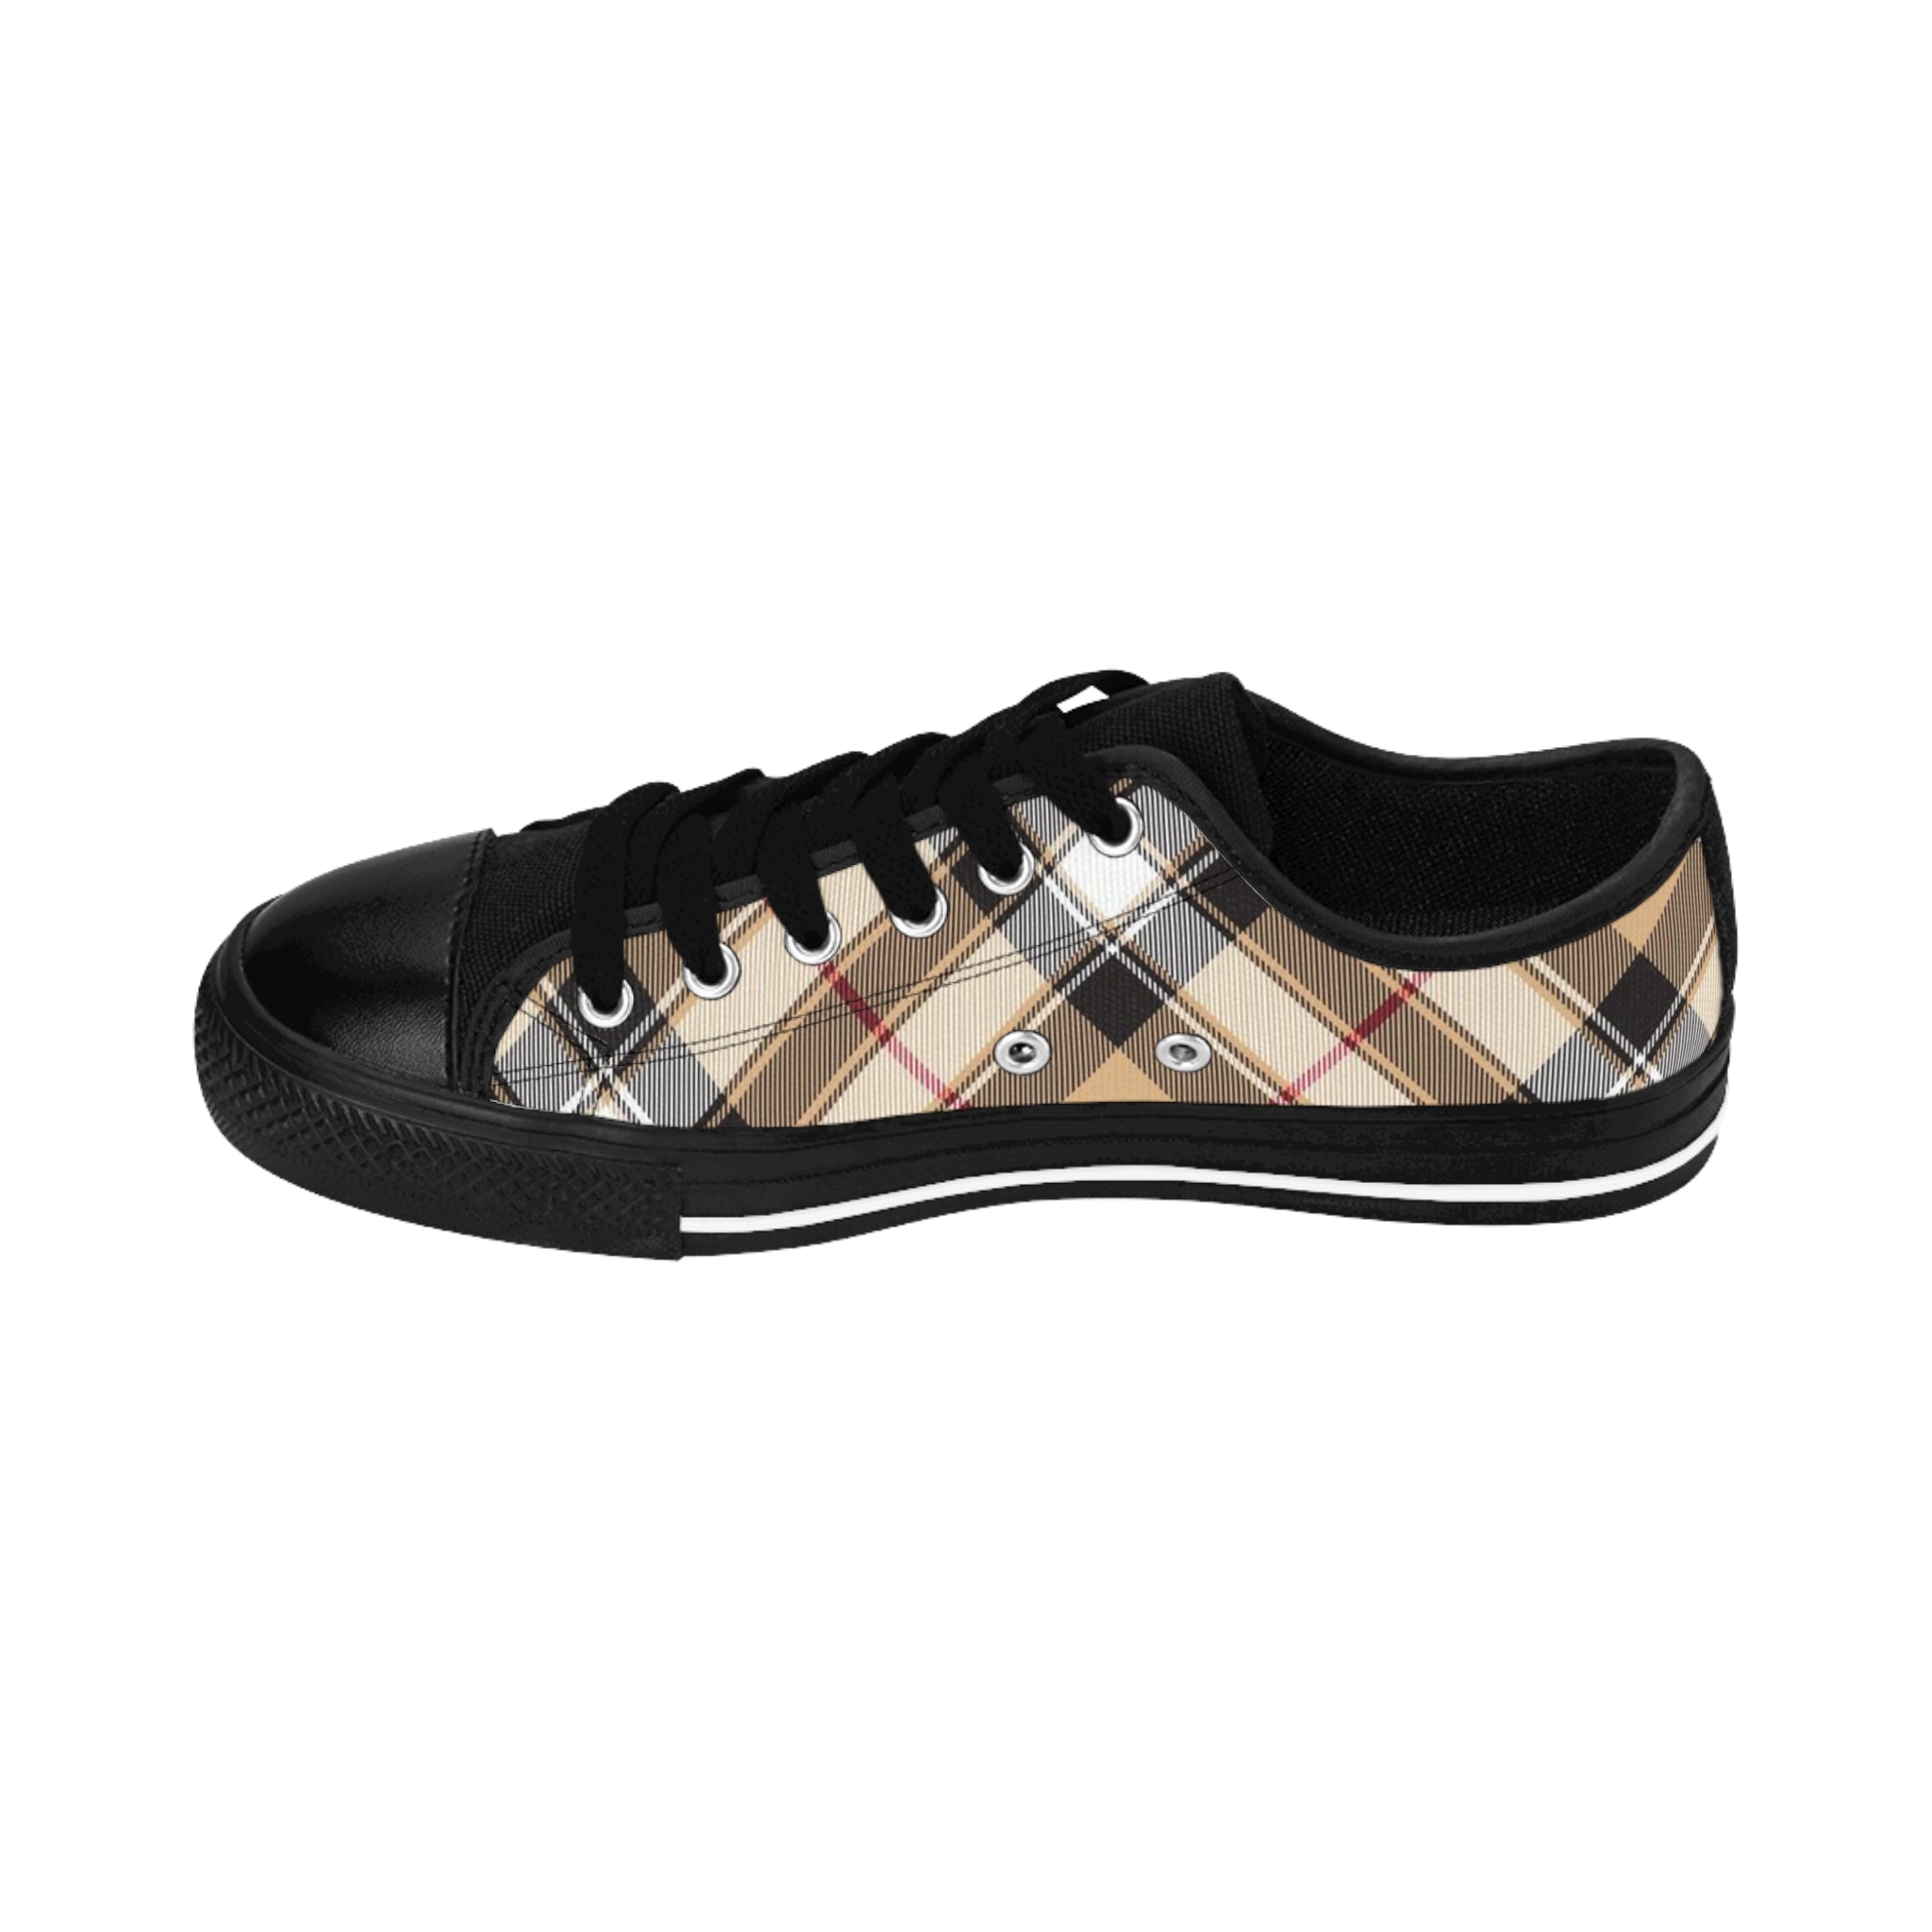 Groove Fashion Collection in Plaid Red Stripe Men's Canvas Tie Up Sneakers